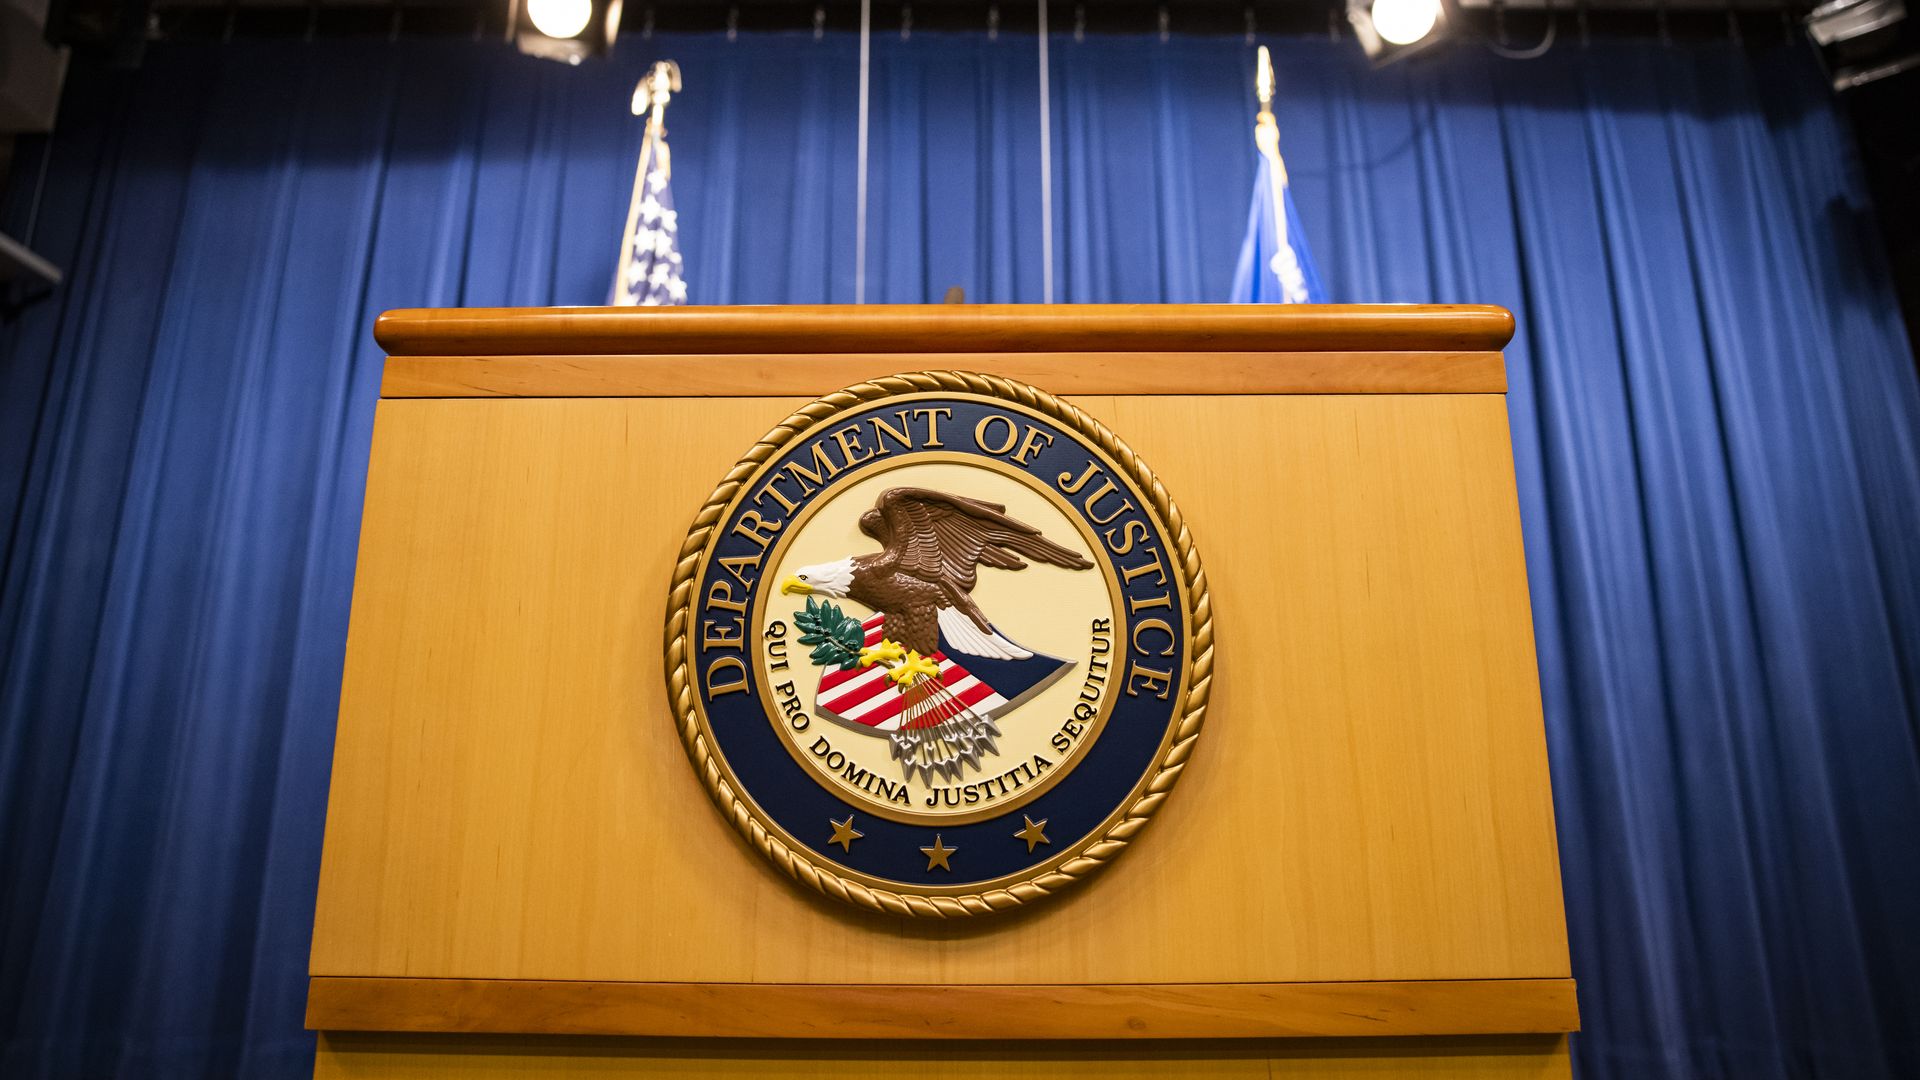 U.S. Department of Justice seal on a podium in Washington D.C. 